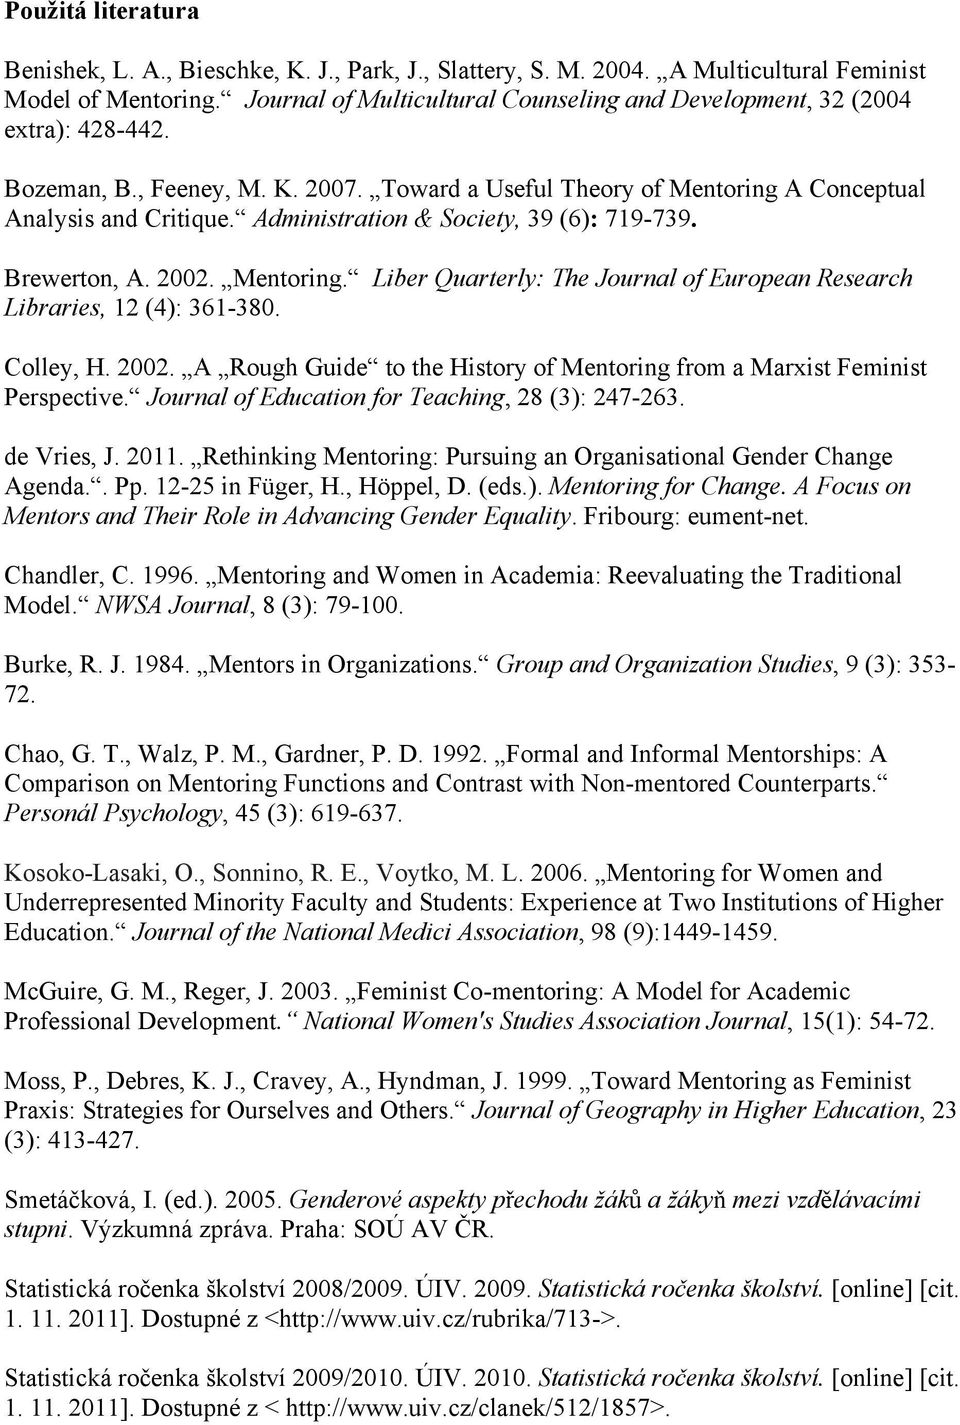 Administration & Society, 39 (6): 719-739. Brewerton, A. 2002. Mentoring. Liber Quarterly: The Journal of European Research Libraries, 12 (4): 361-380. Colley, H. 2002. A Rough Guide to the History of Mentoring from a Marxist Feminist Perspective.